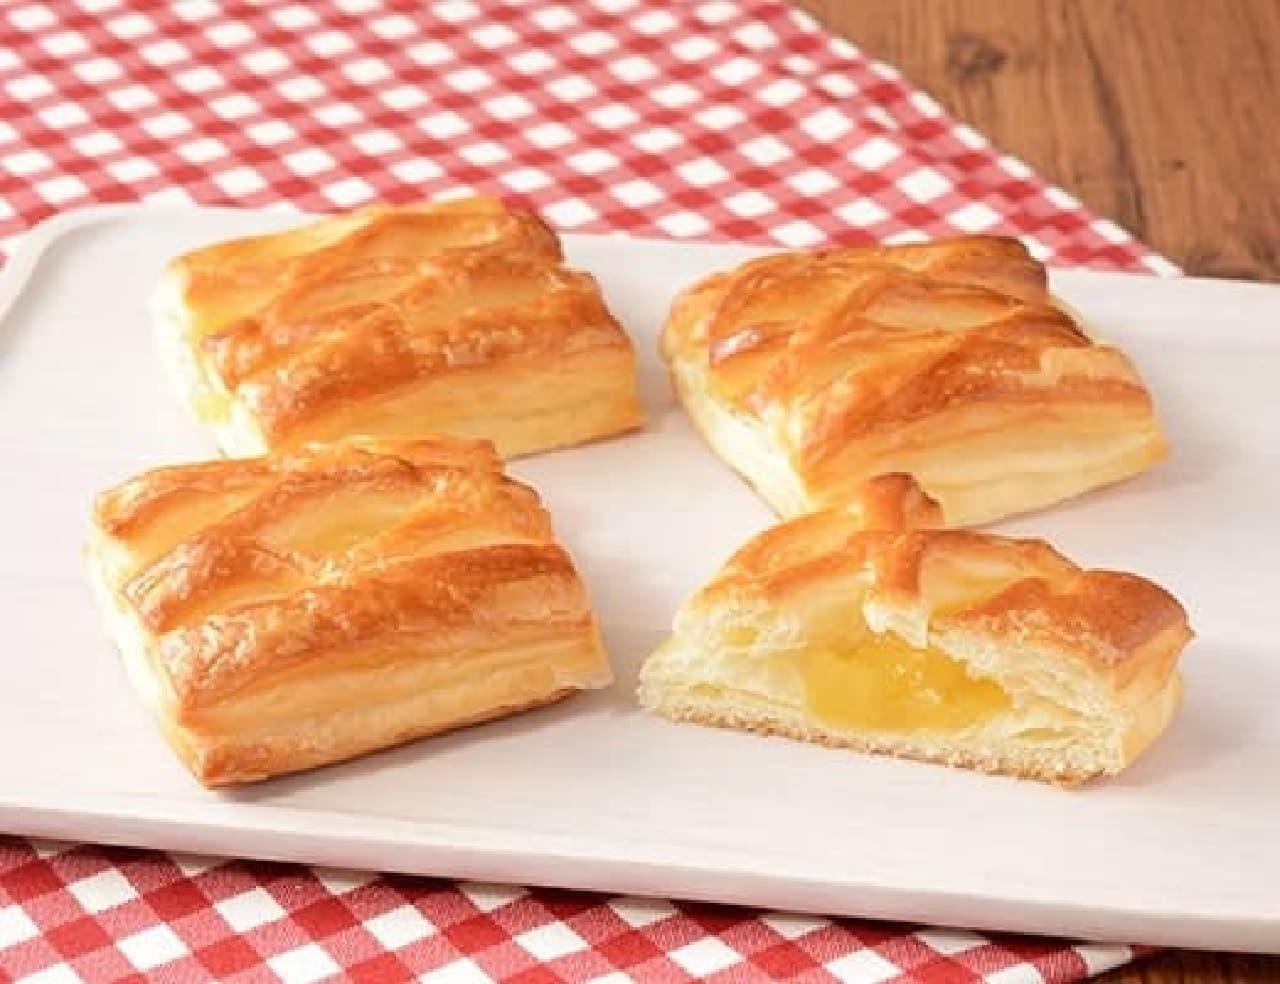 LAWSON "Danish with apple cubes, 4 pieces